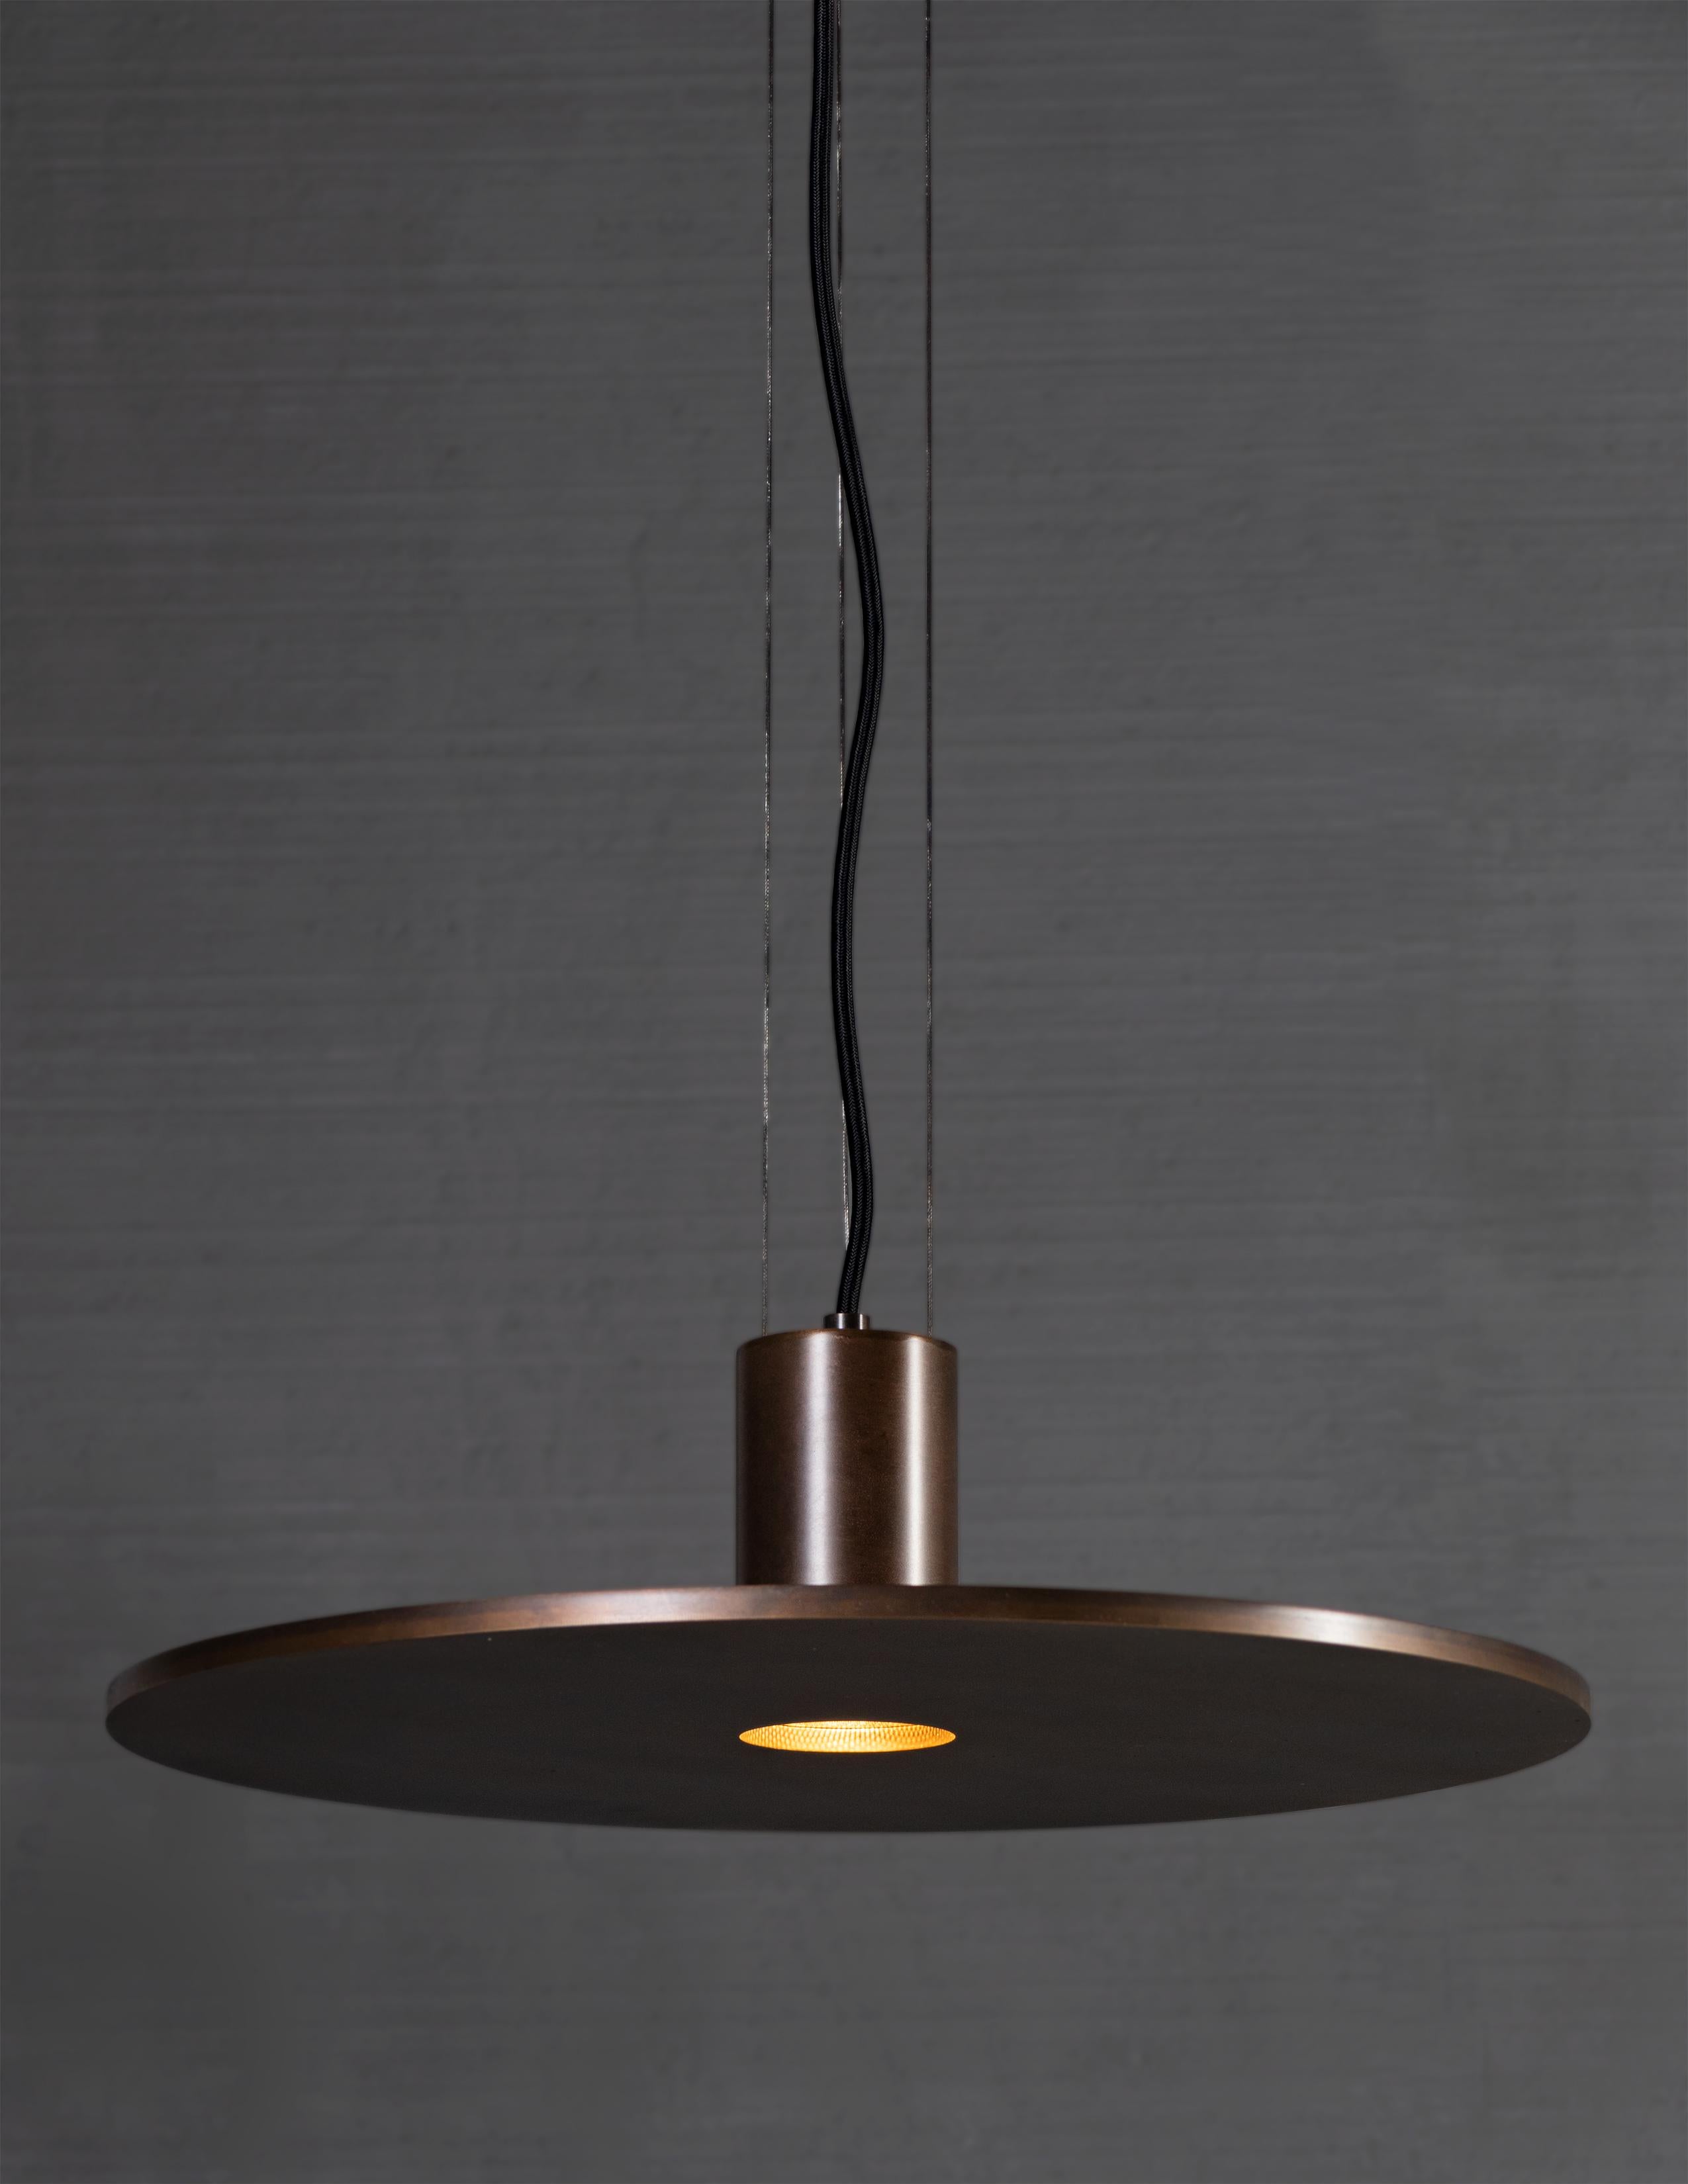 Patinated brass disc light. Cable suspension 

Bulb 1 medium base 60 watt incandescent

Handcrafted in Italy.

Measures: Minimum hanging height: N/A
Maximum hanging height: 72